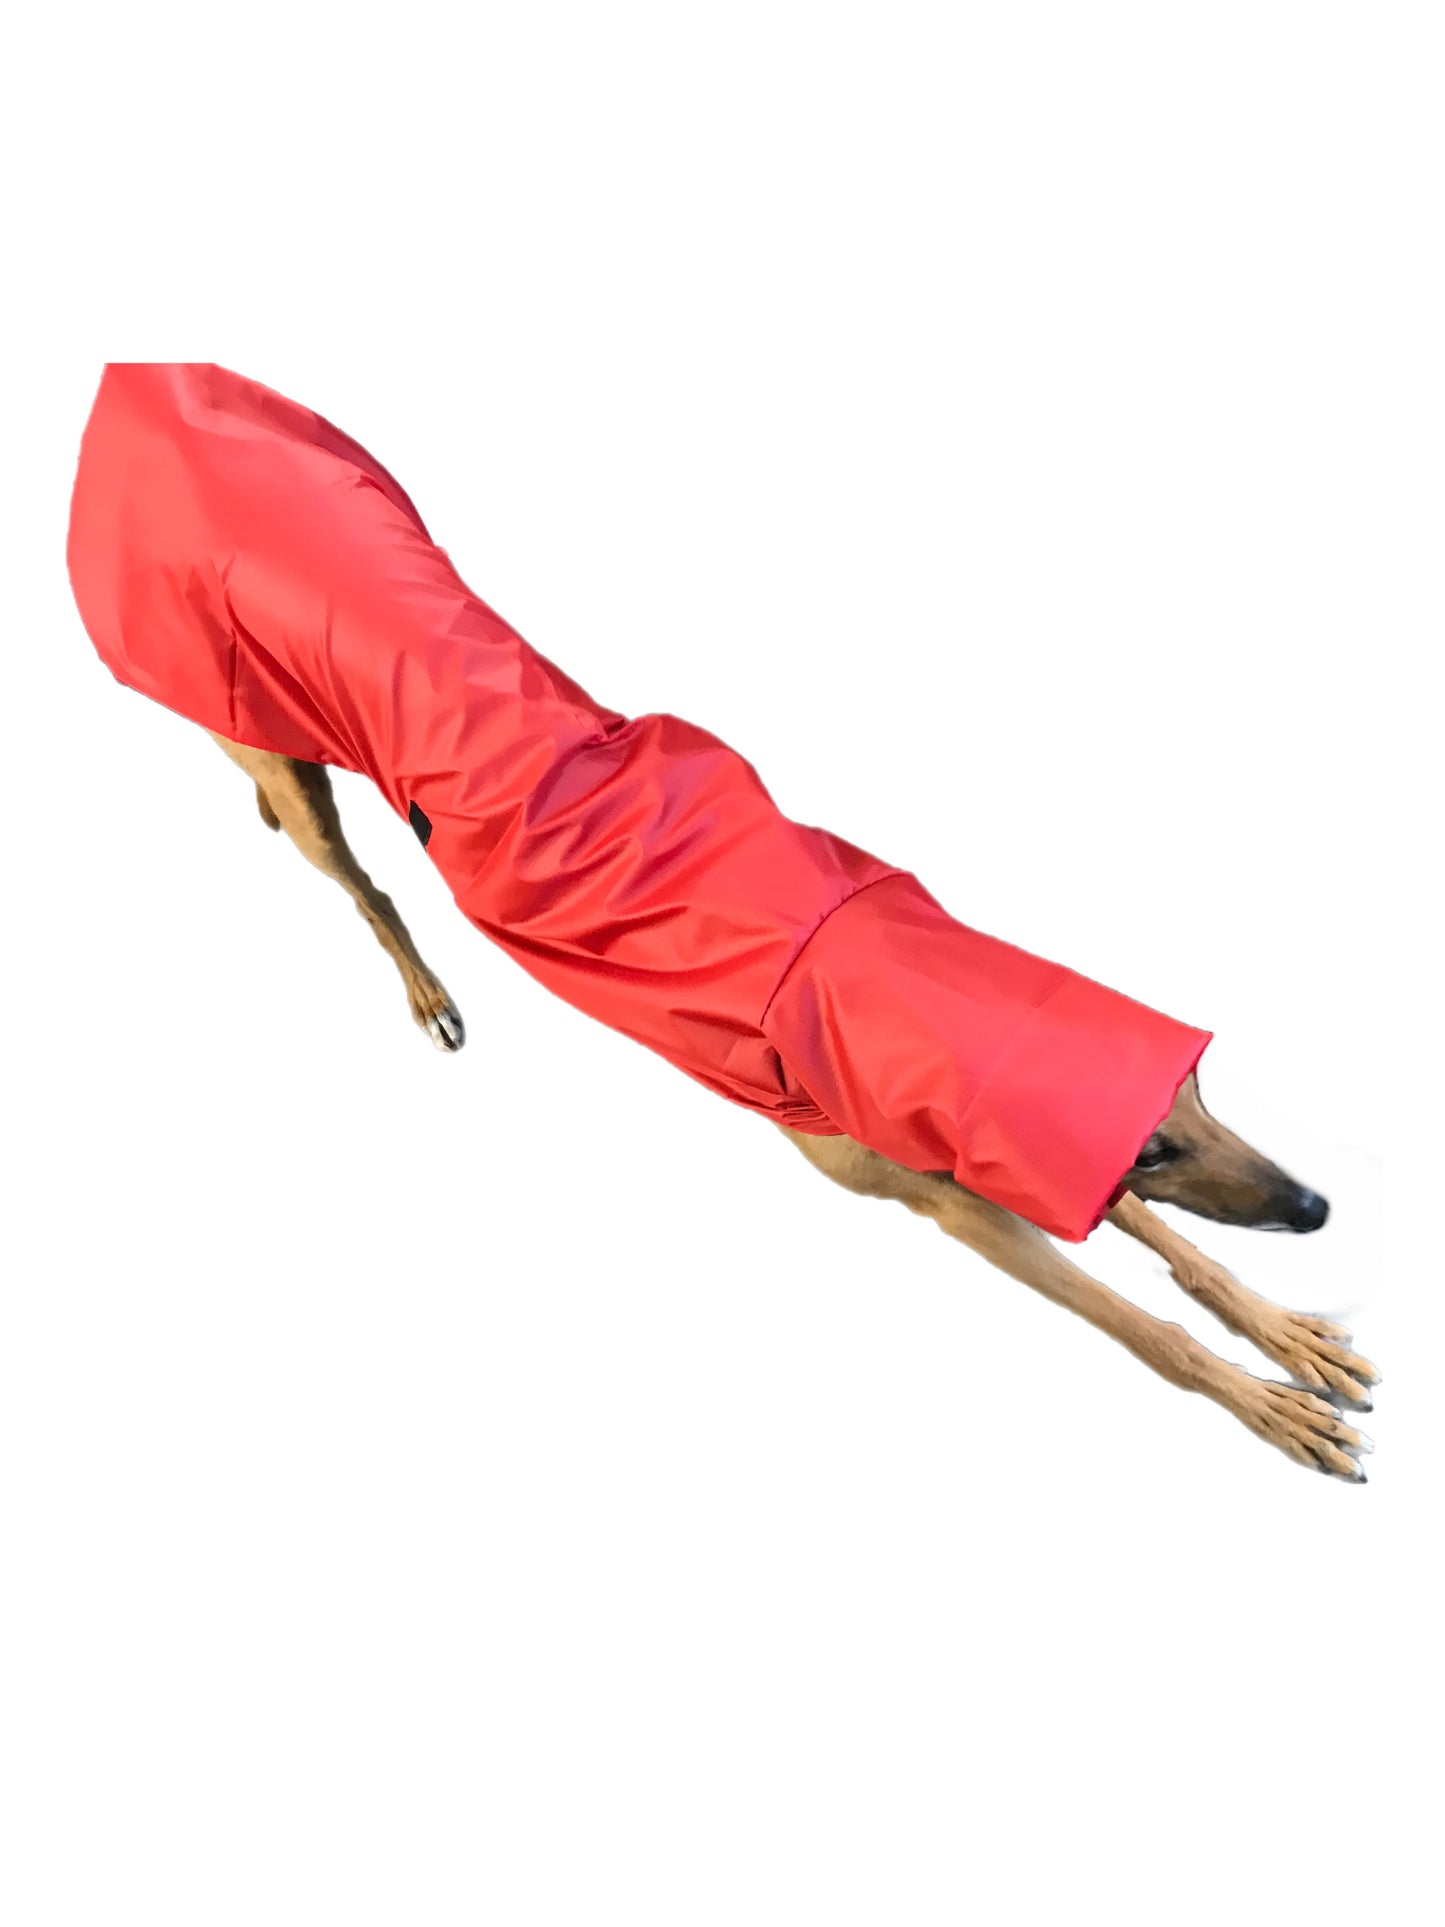 Flame red super soft Greyhound coat deluxe style, summer rainwear, washable